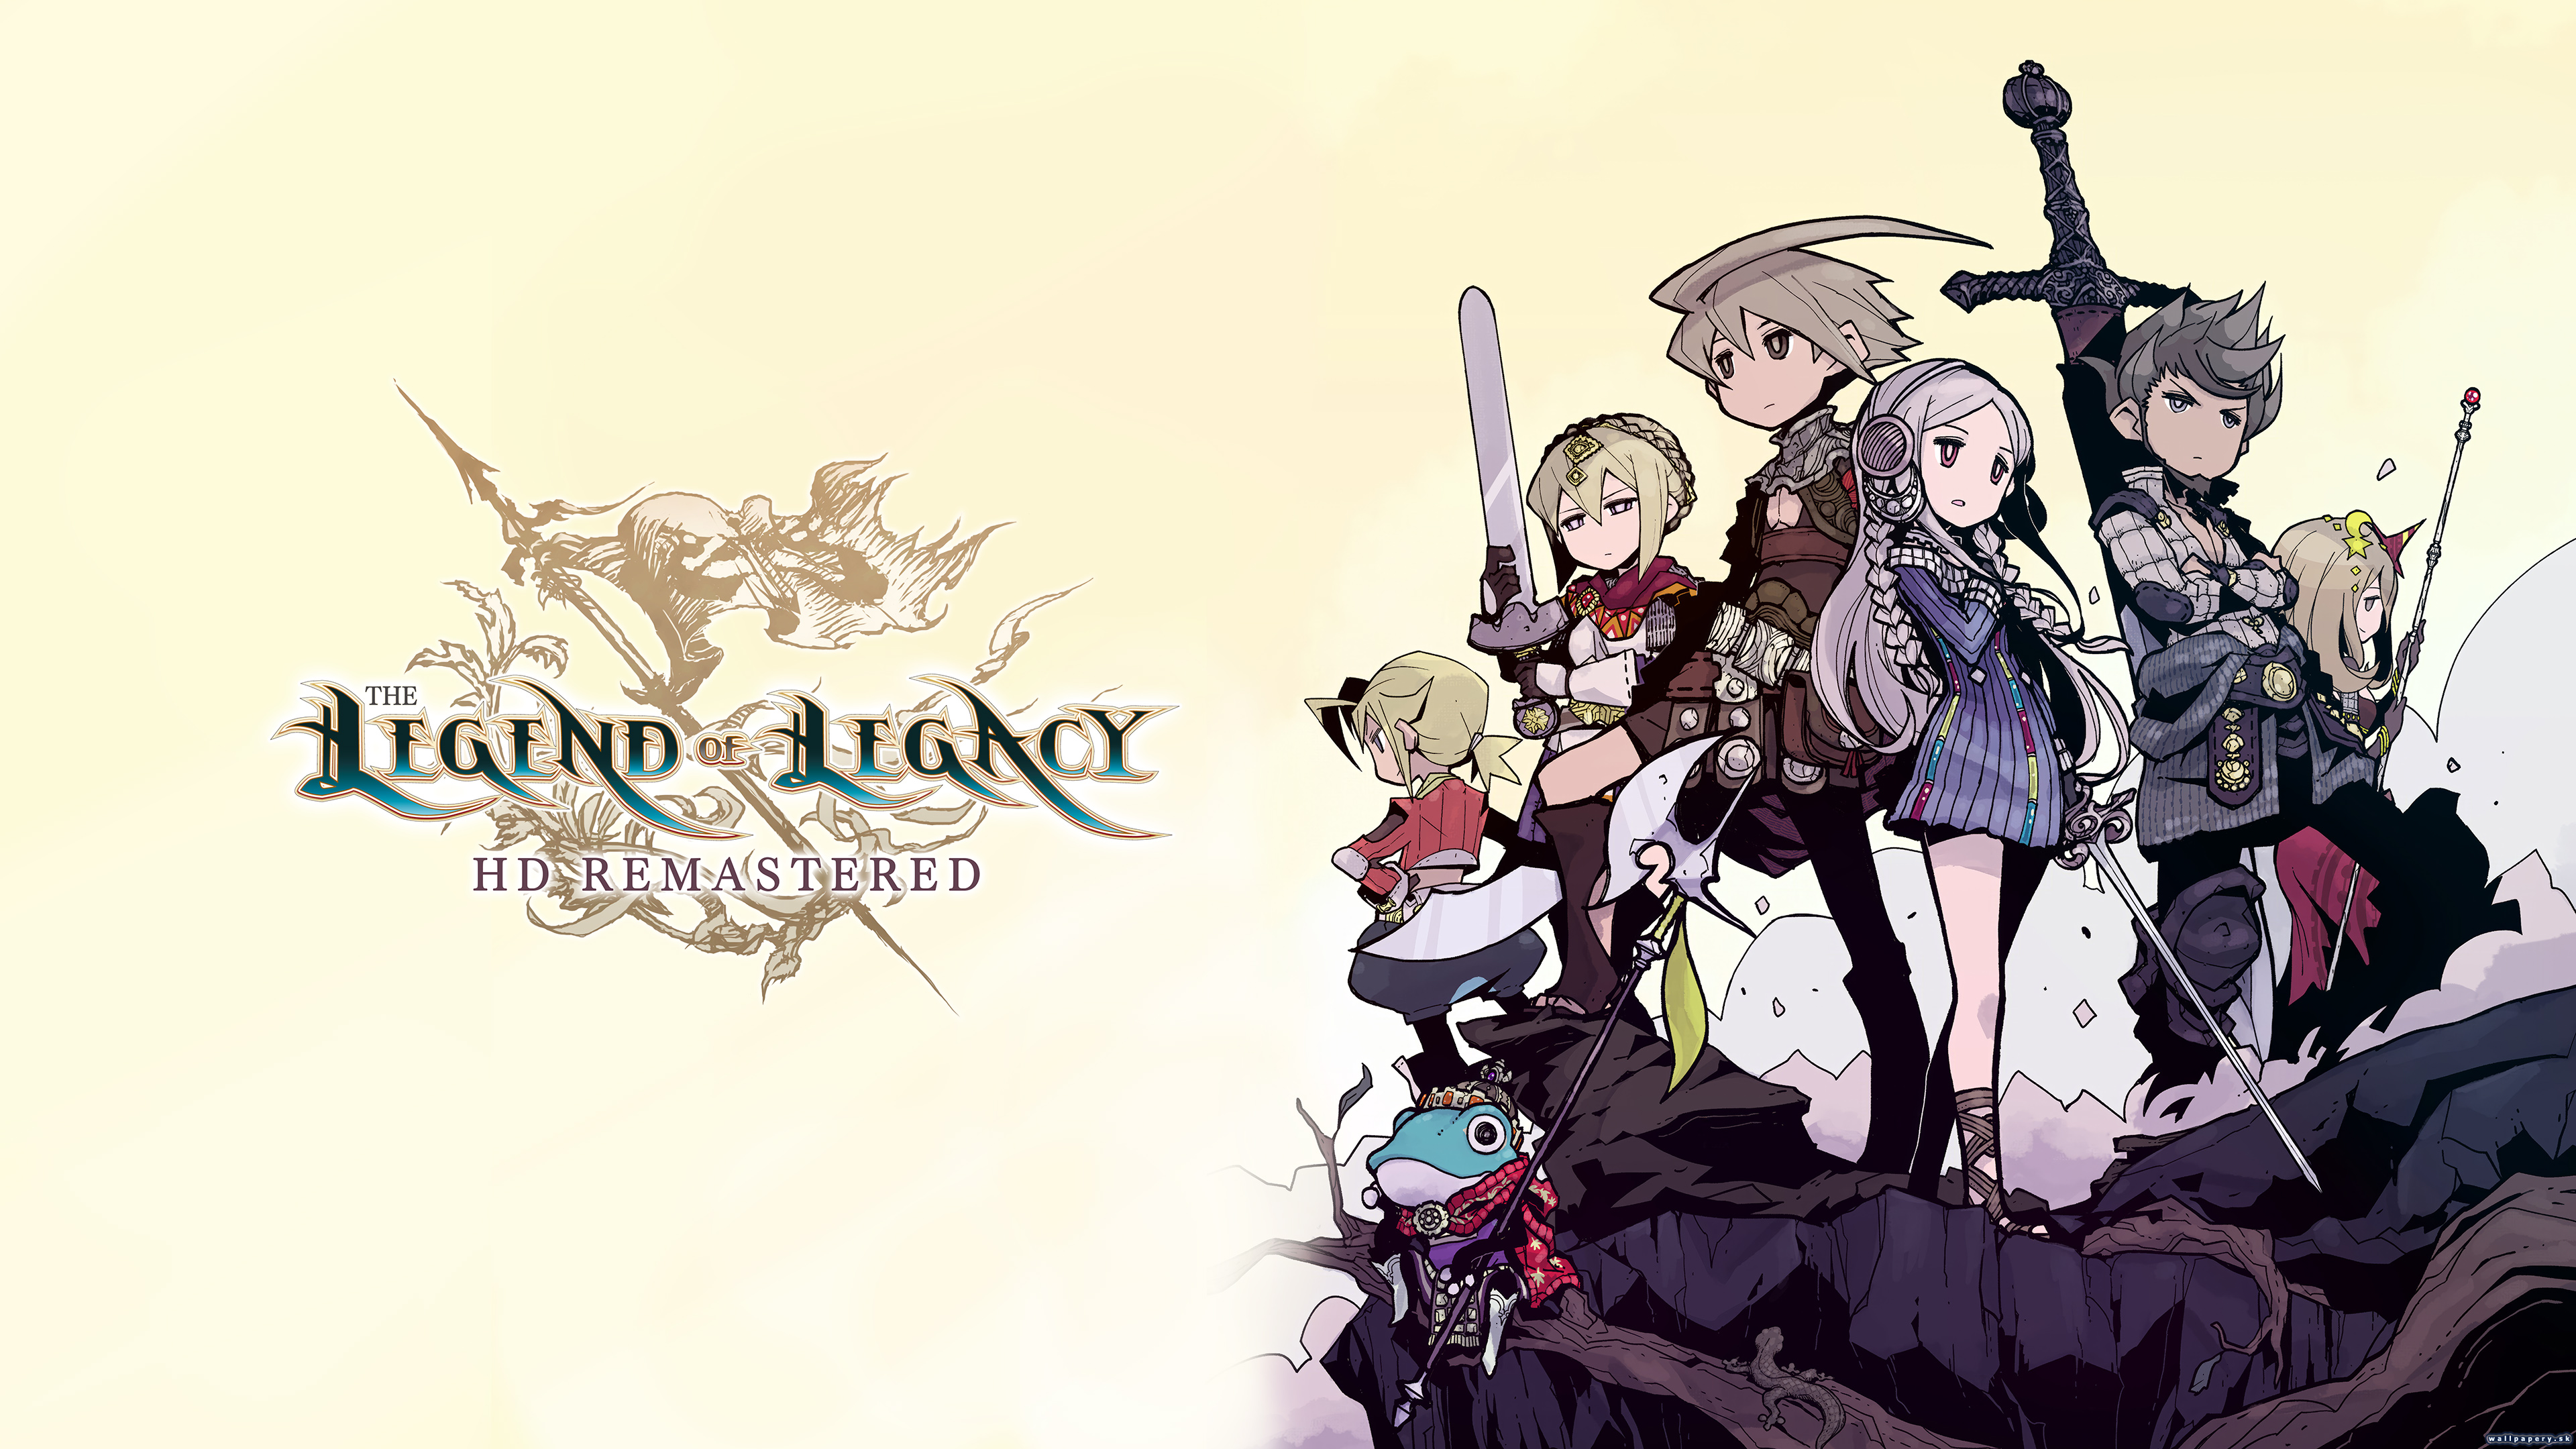 The Legend of Legacy HD Remastered - wallpaper 1